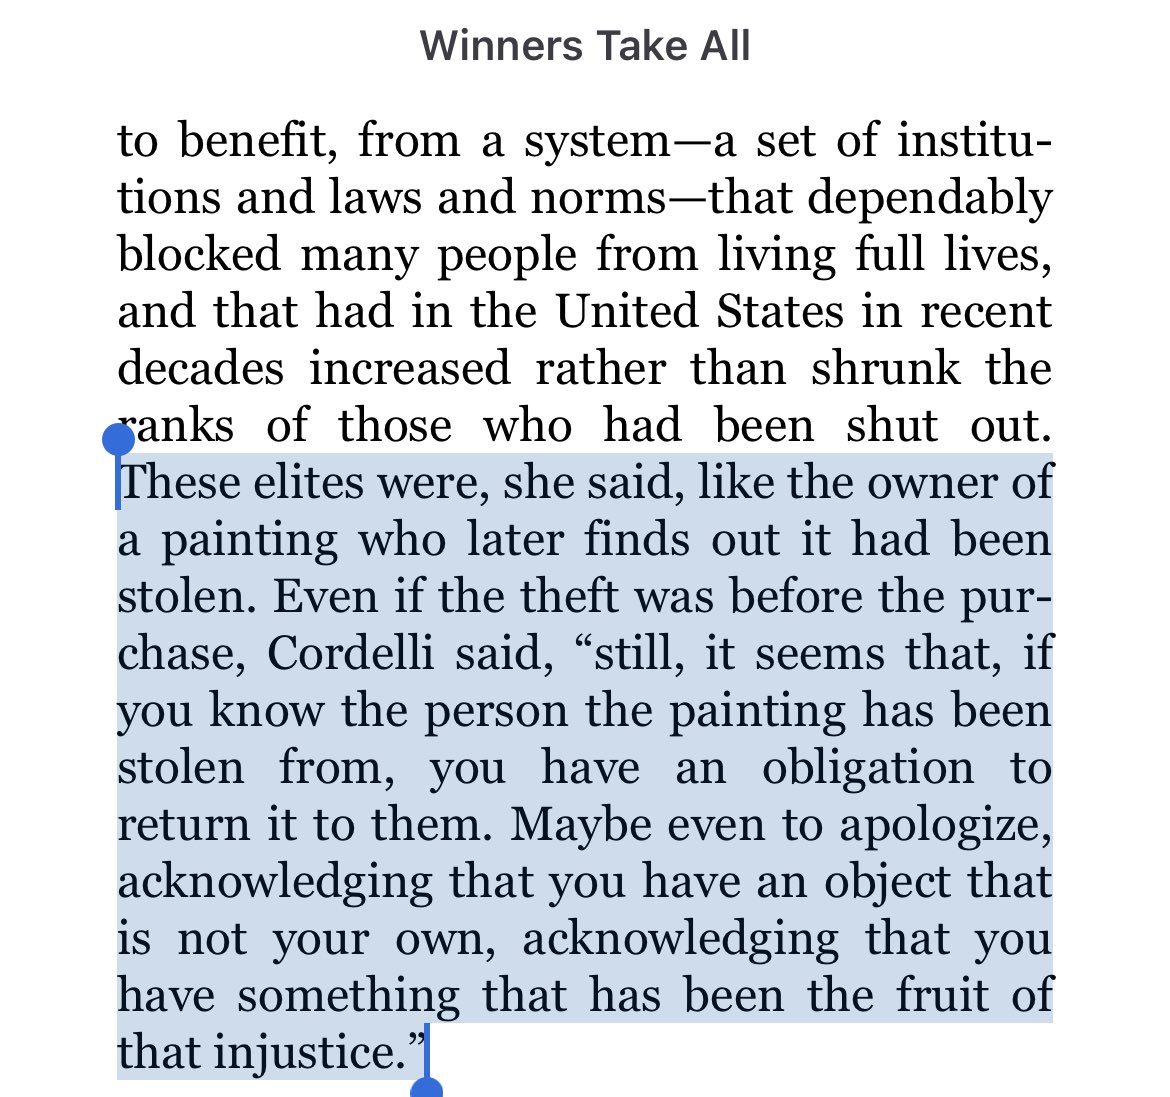 Admittedly, MacKenzie Scott’s situation is complicated. But given the union-busting and tax avoidance that made the fortune possible, one way to understand the gifts is through  @chiaracordelli’s analogy of the stolen painting.